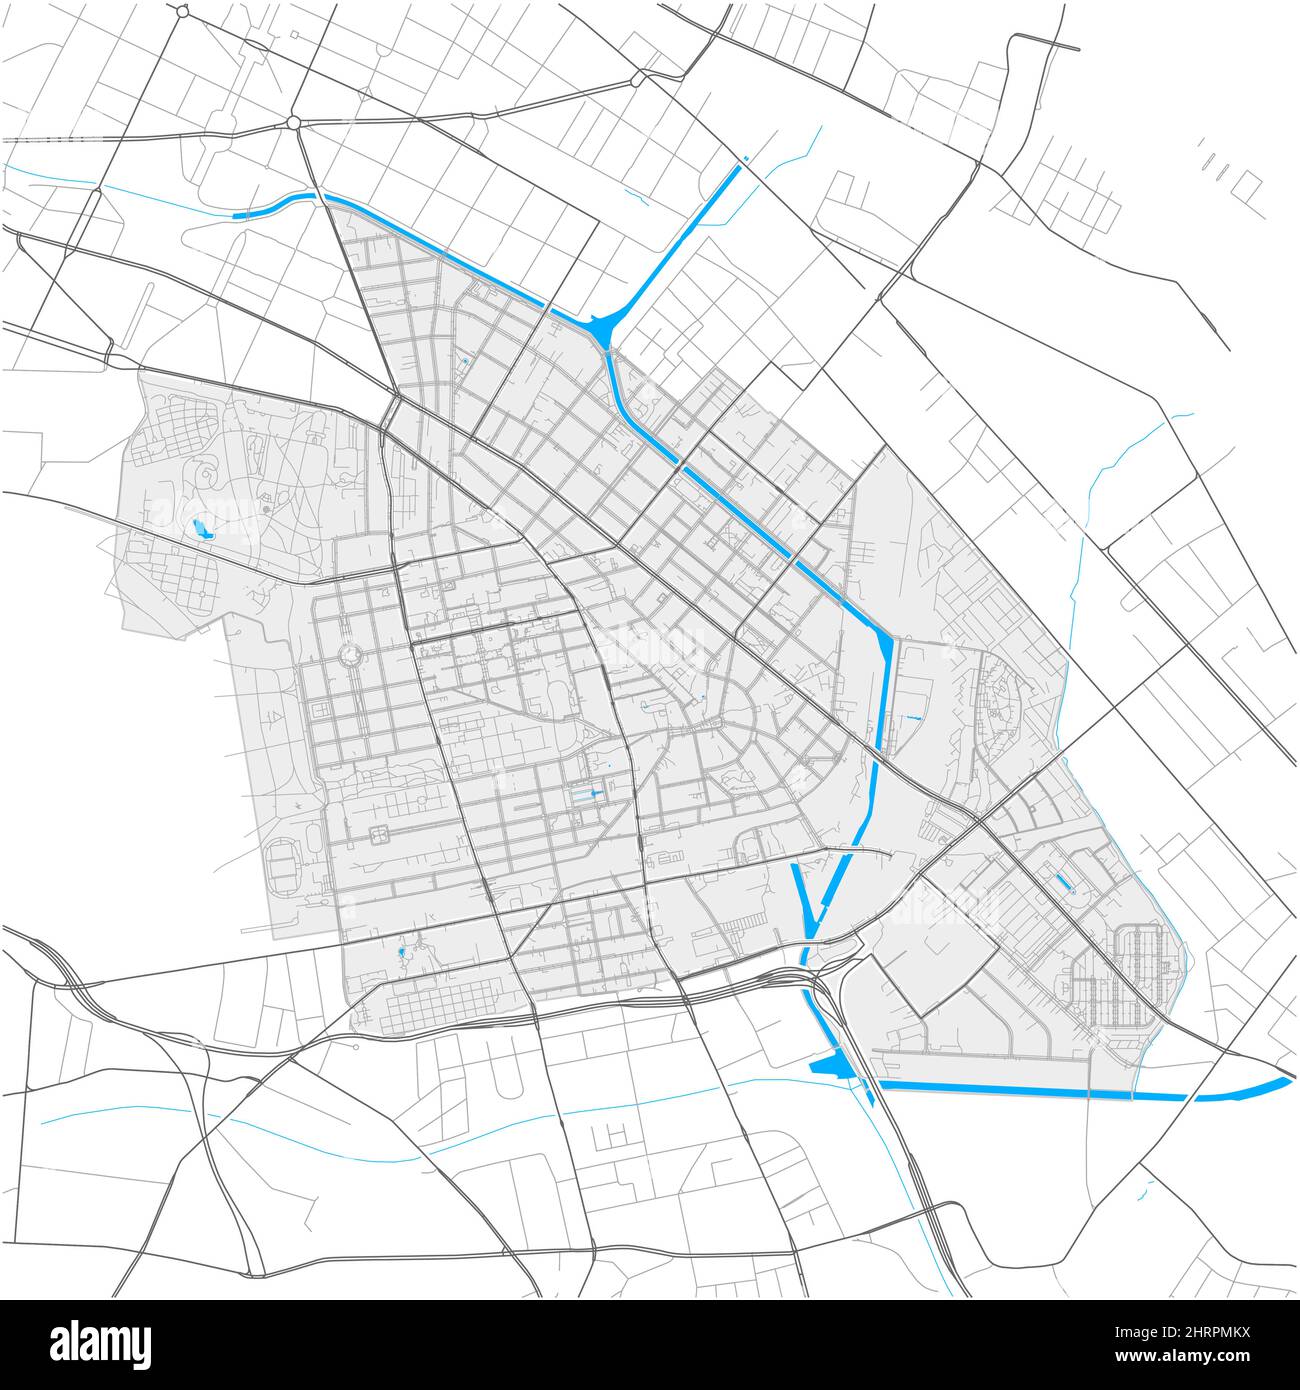 Neukölln, Berlin, DEUTSCHLAND, high detail vector map with city boundaries and editable paths. White outlines for main roads. Many smaller paths. Blue Stock Vector